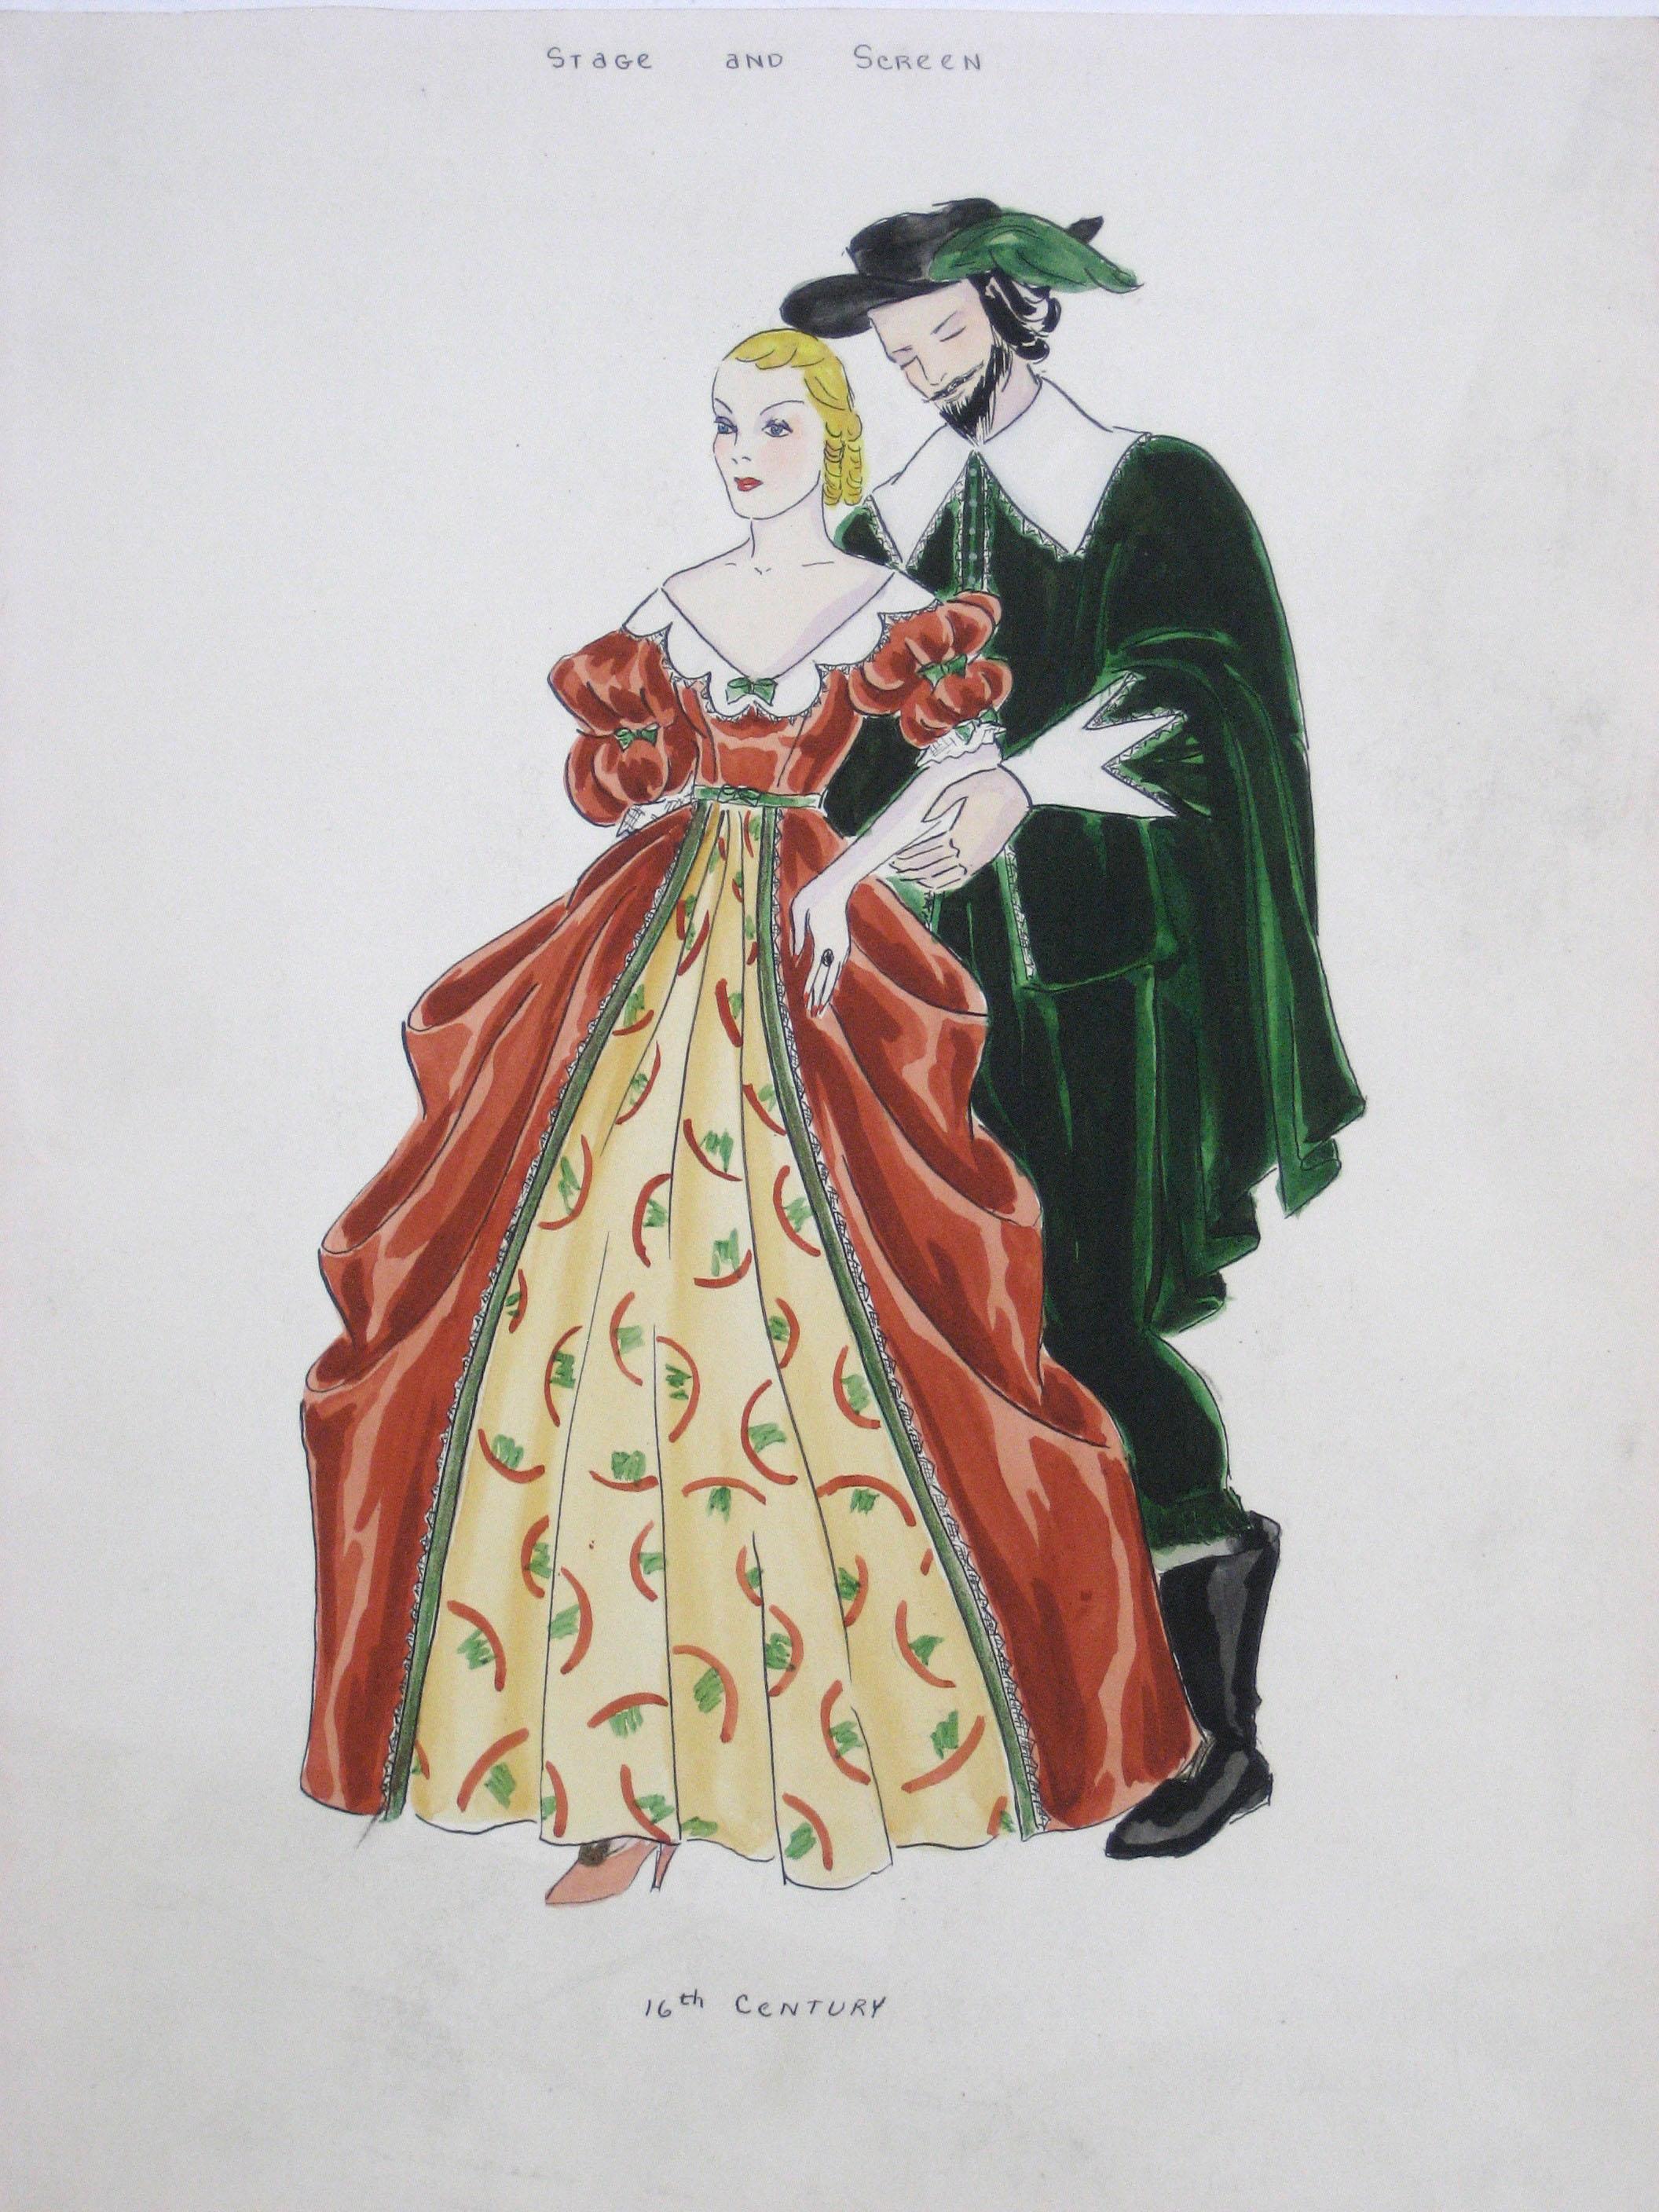 16th Century "Stage and Screen" Renaissance Couple in Festive Garments  - Mixed Media Art by Unknown